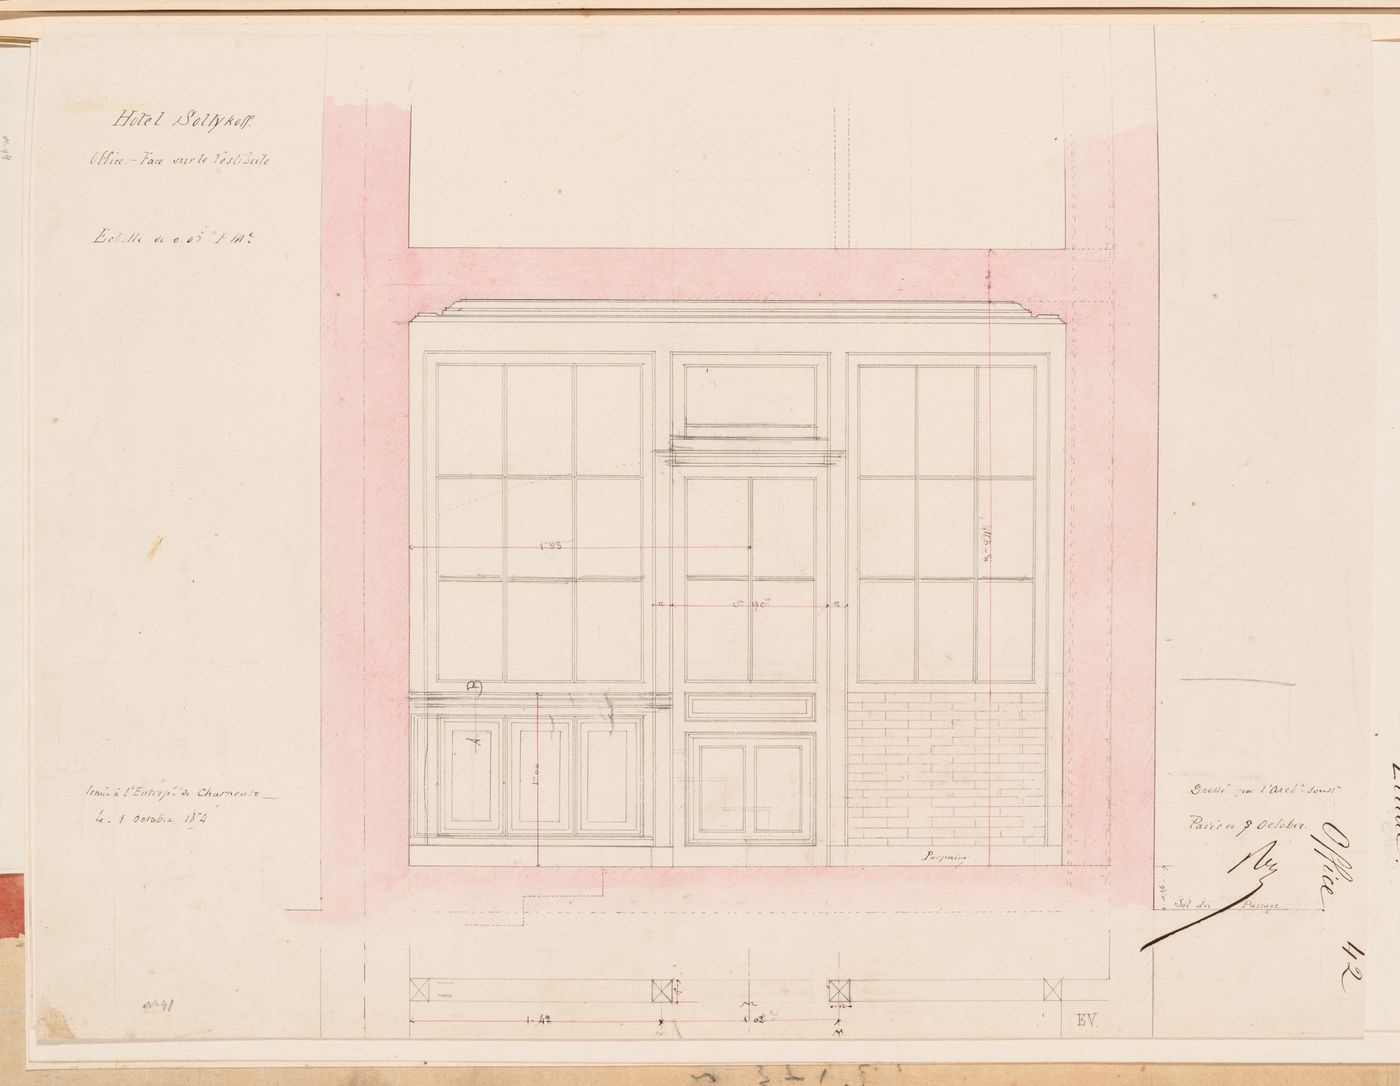 Section for the ground floor "office" showing the interior wall, Hôtel Soltykoff